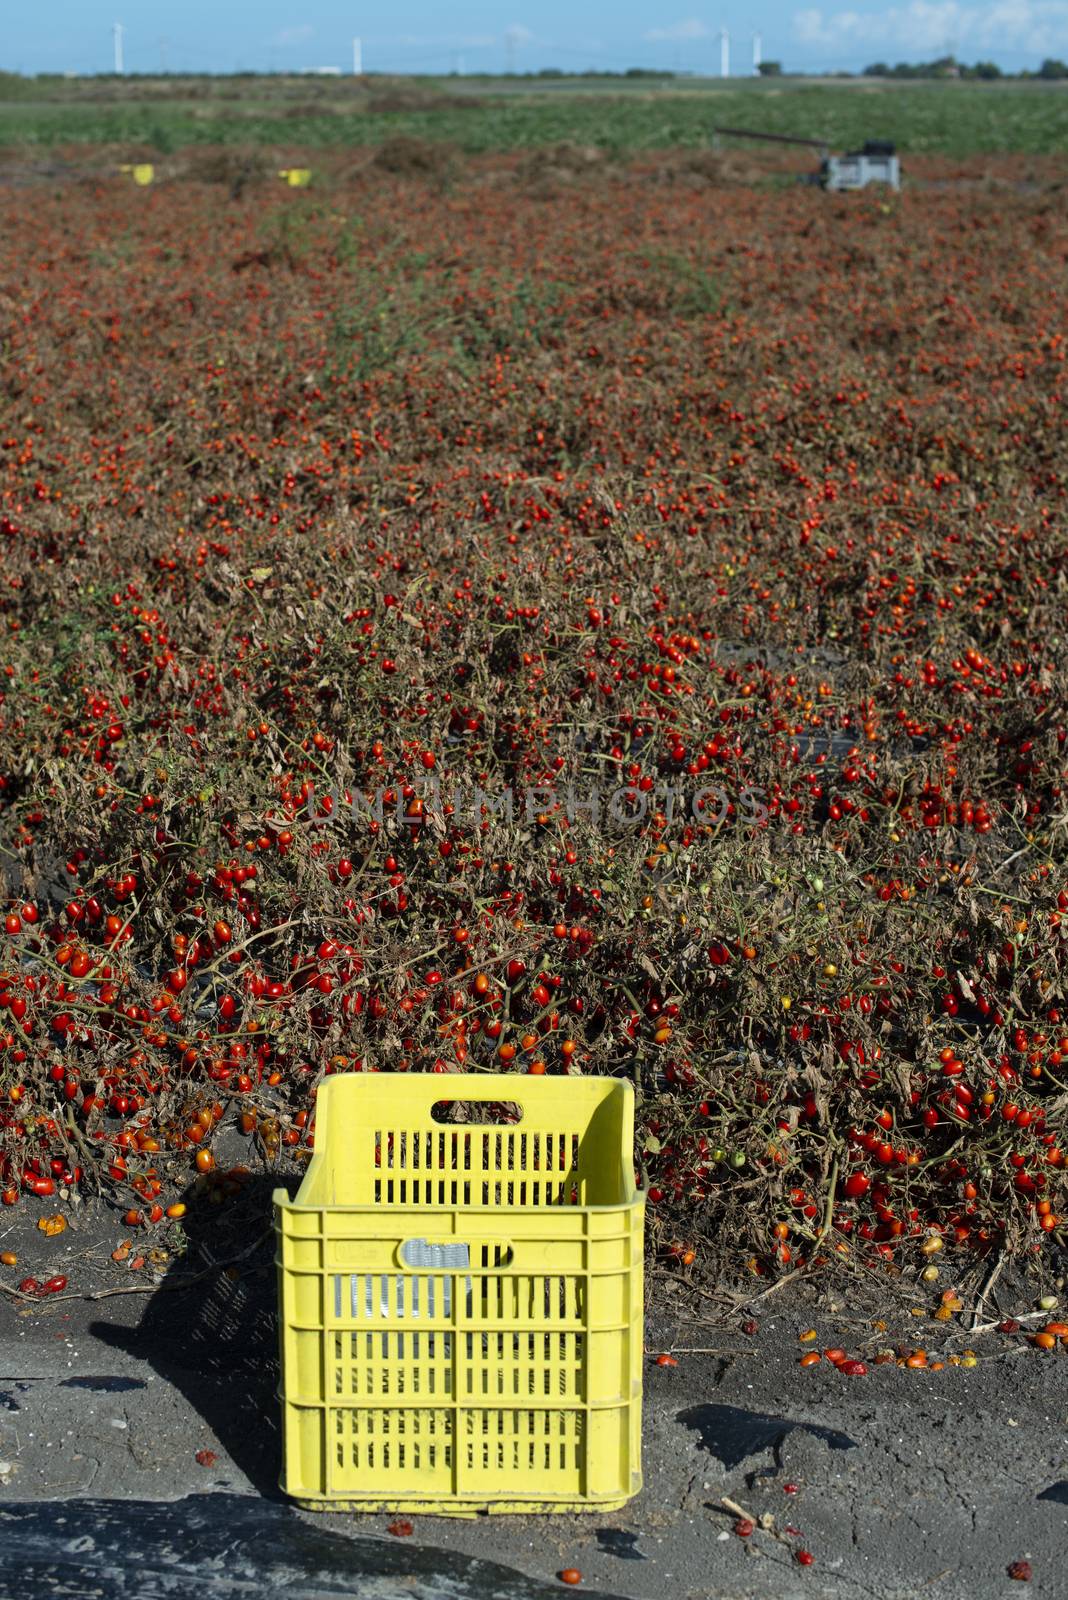 Small cherry tomatoes on the field. Overripe tomatoes on the ground. Yellow crate. Agriculture land.